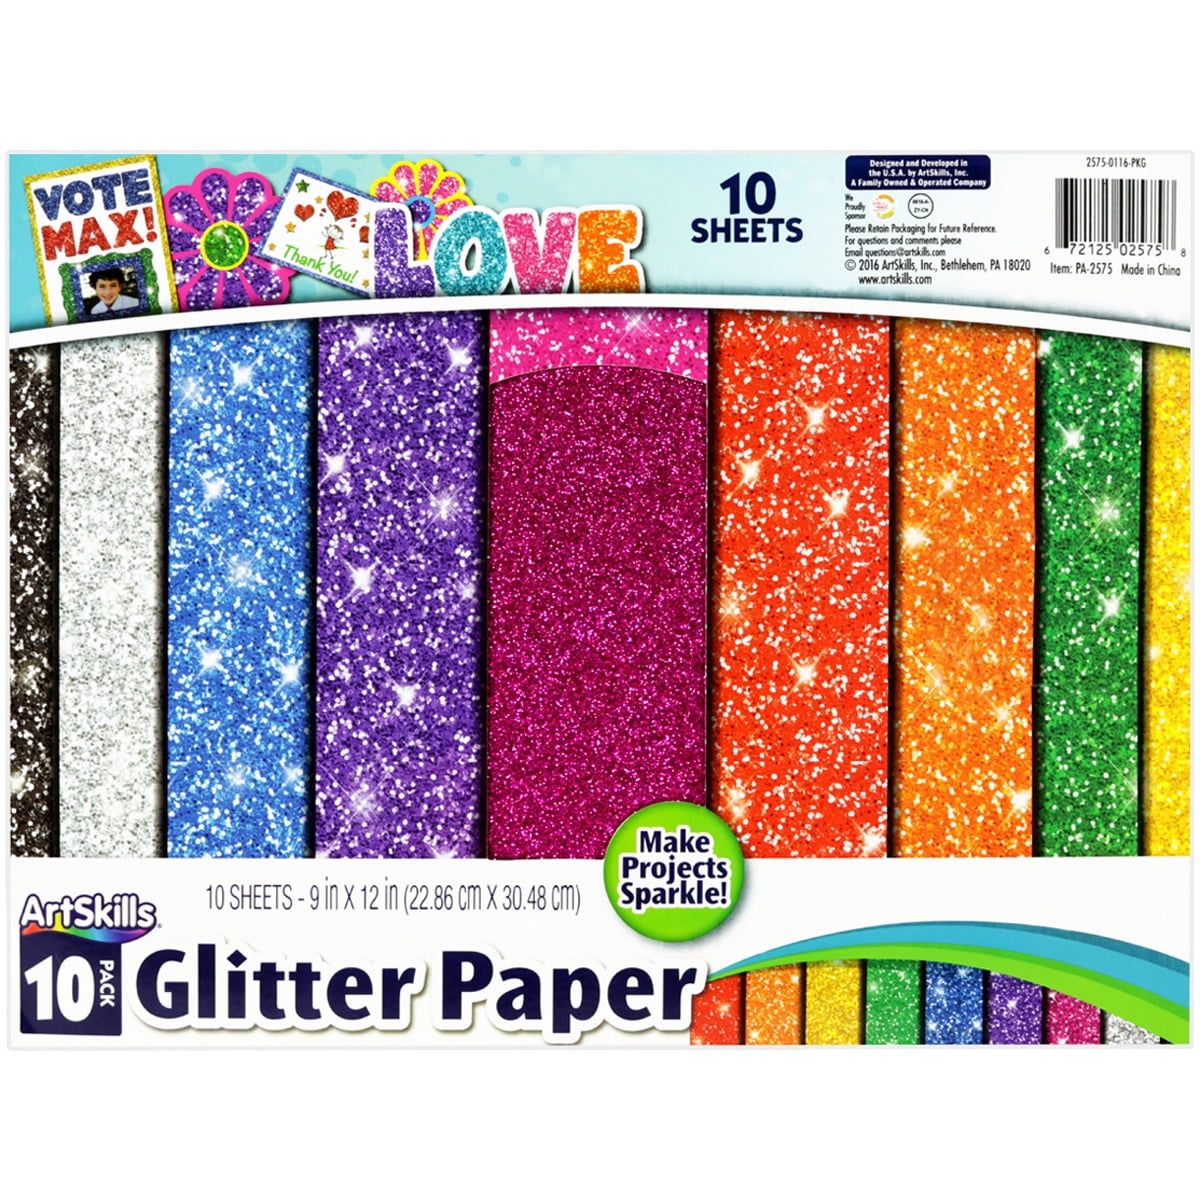 1 lb. of Glitter in a Variety of Vibrant Colors! - The Craft Shop